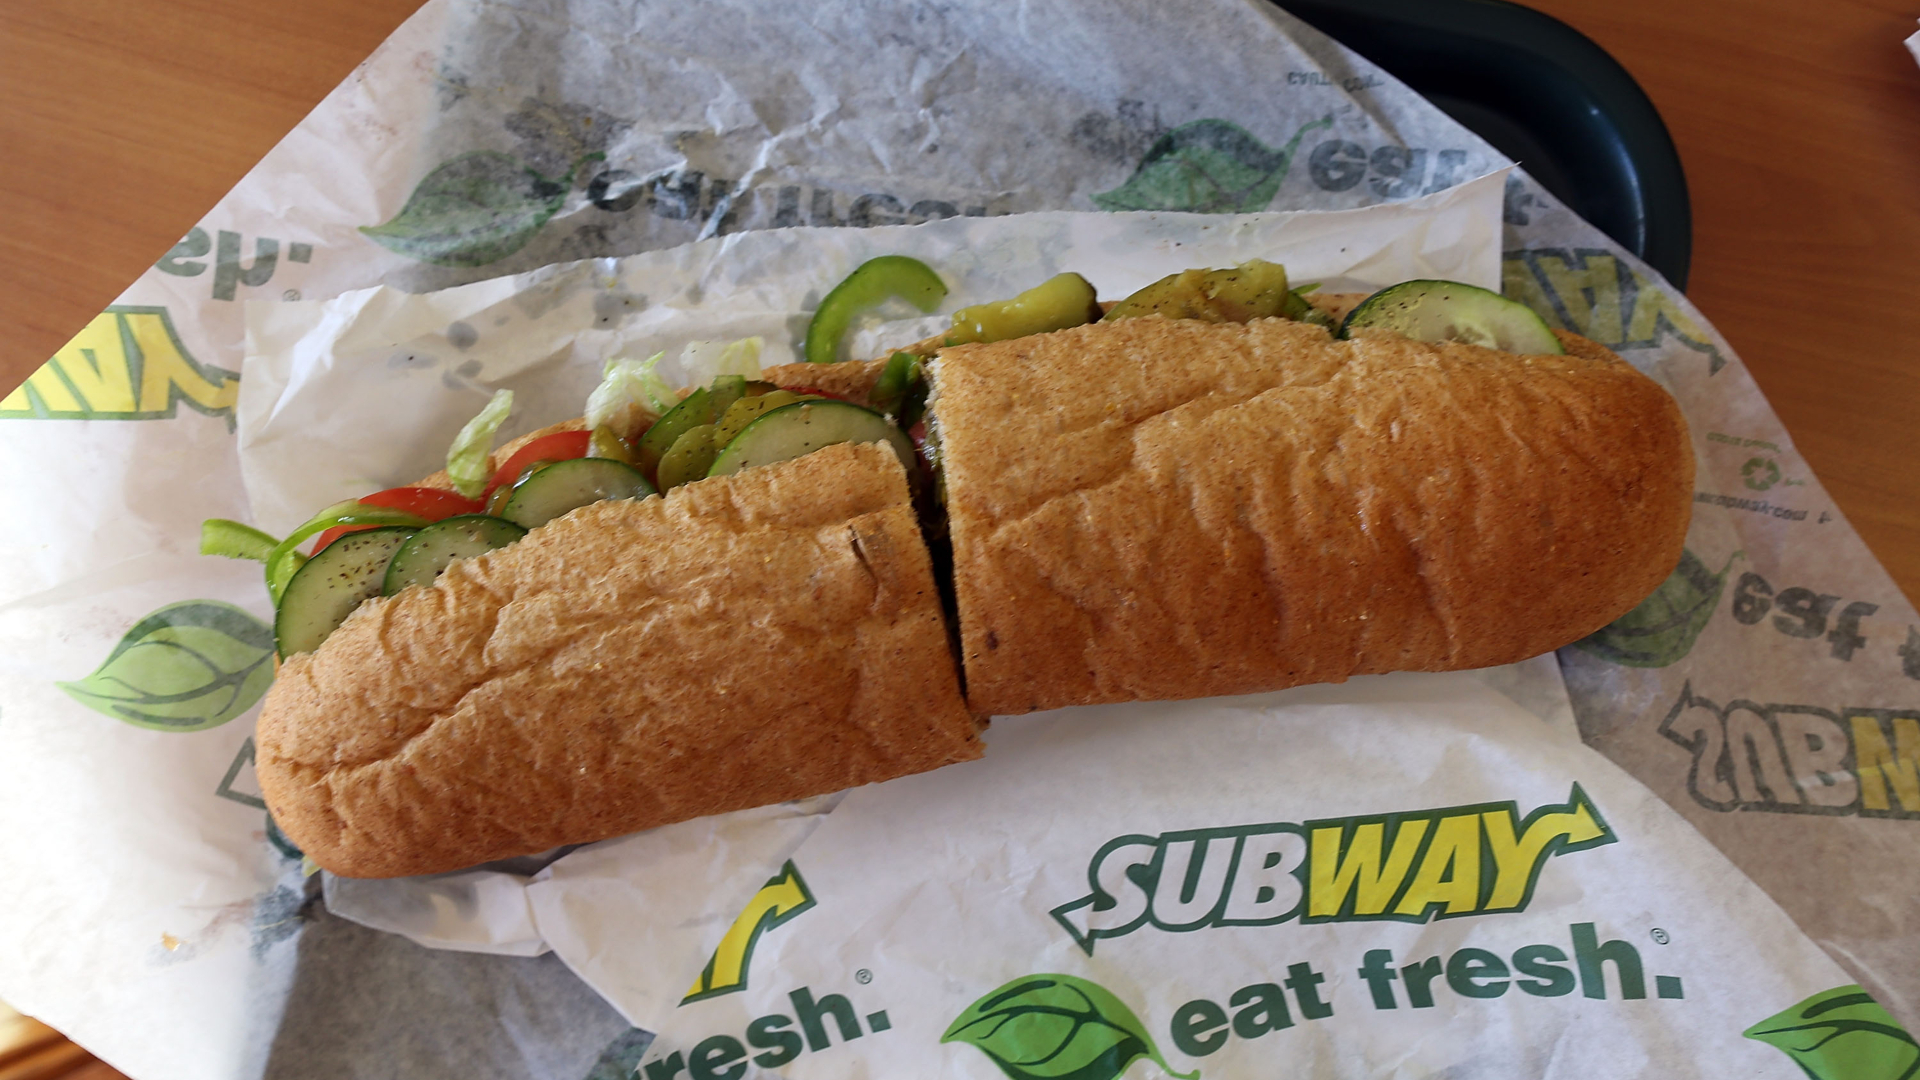 Subway offering a lifetime of free subs if you change your name